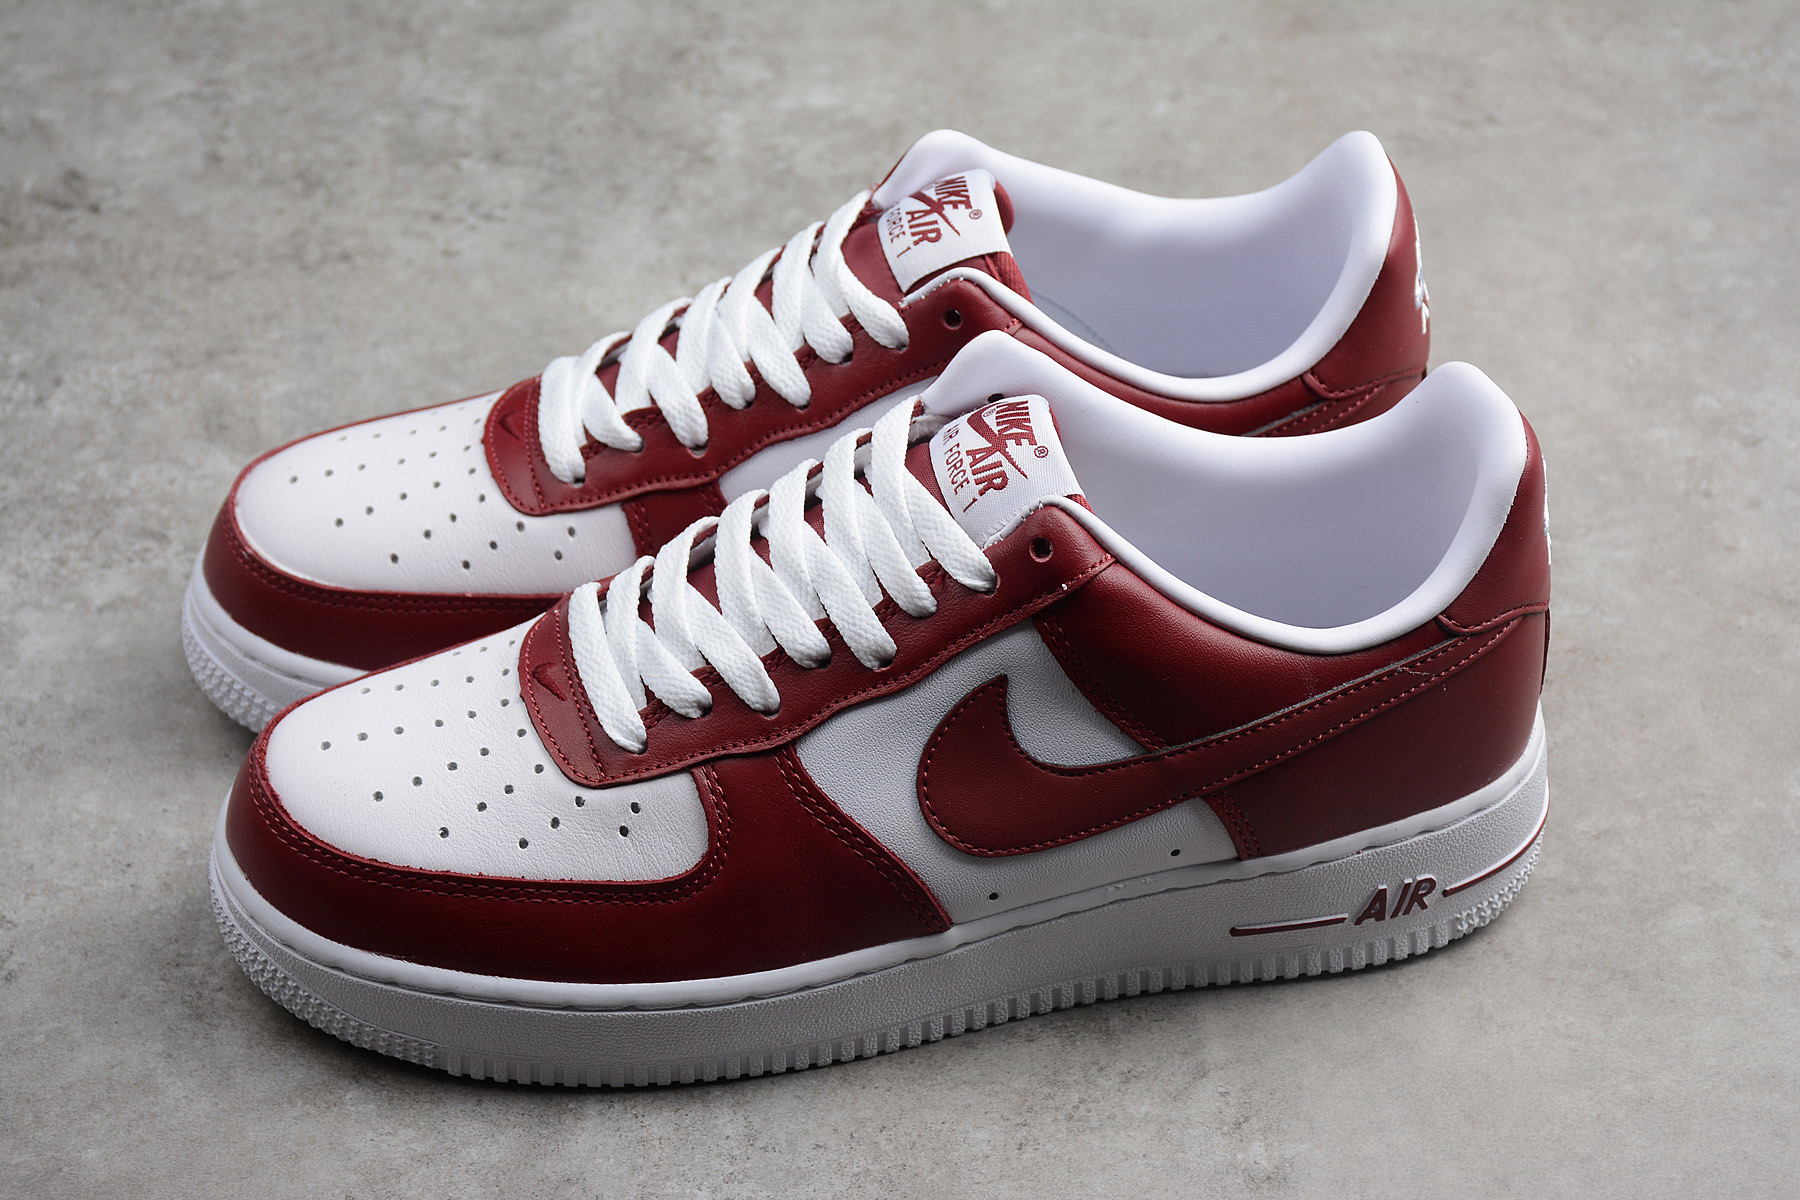 Men's Nike Air Force 1 Low Team Red/White Sneakers AQ4134-600